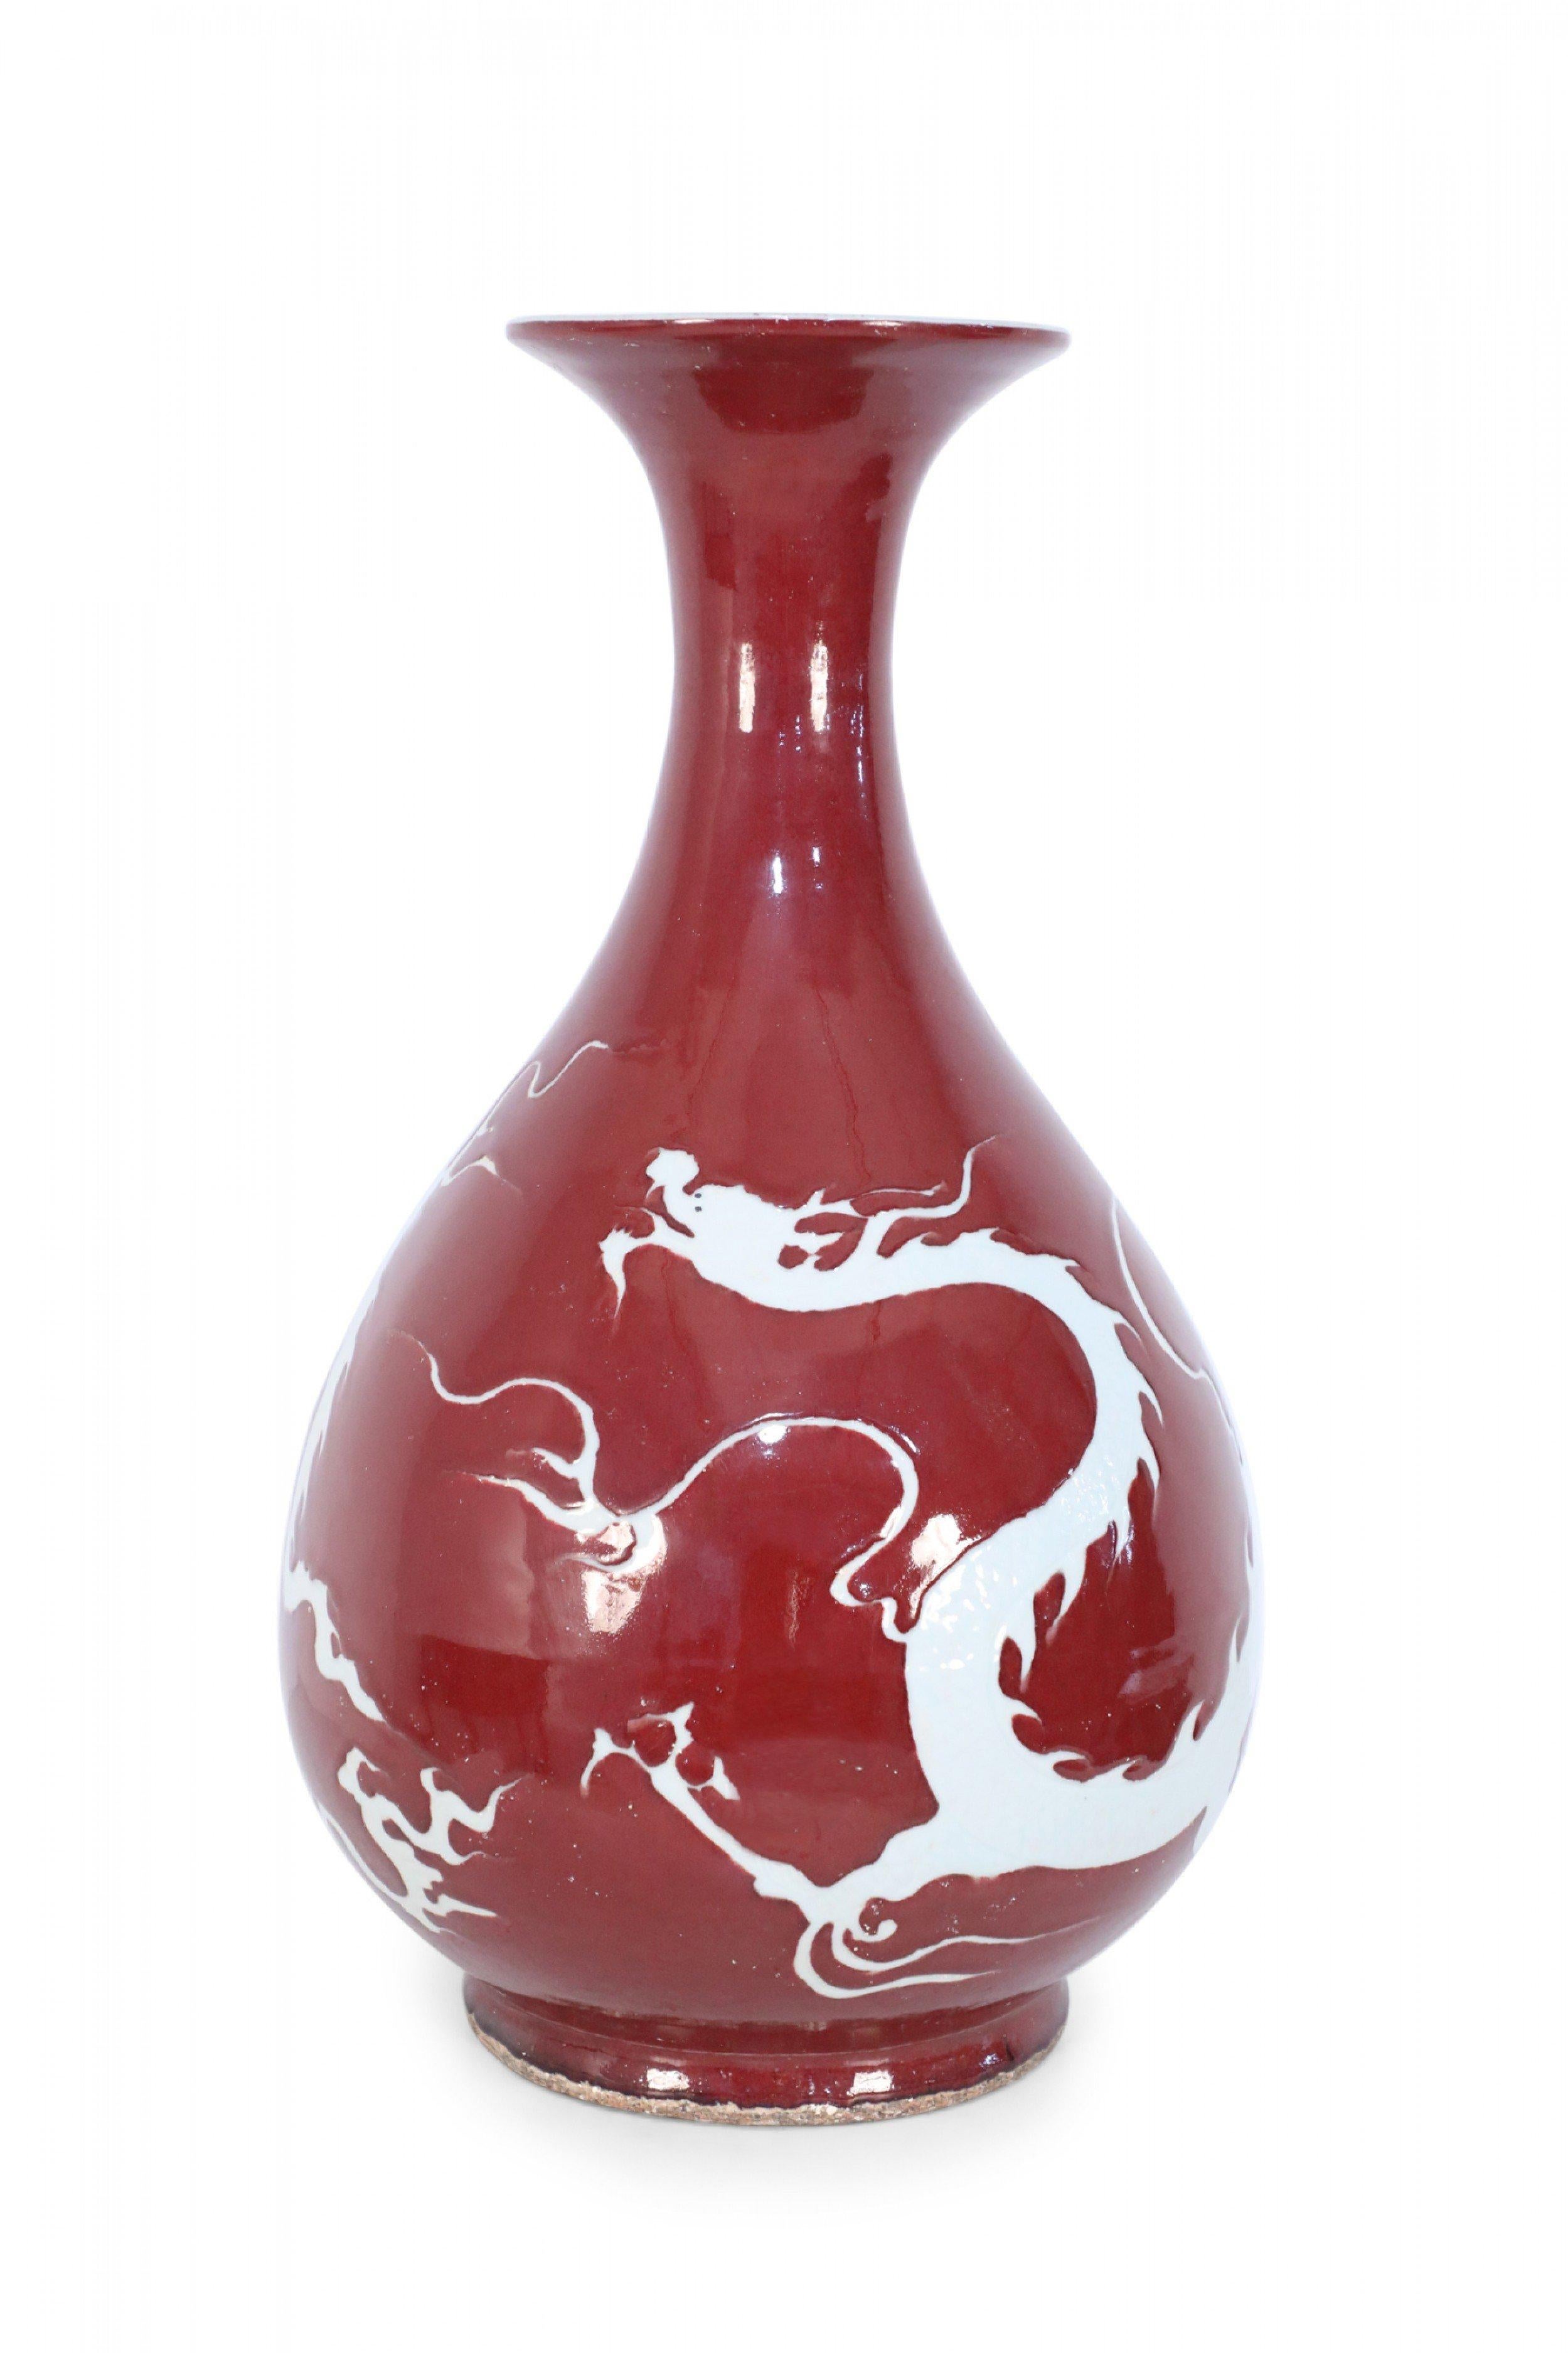 Pair of Chinese ceramic burgundy vases decorated with the white silhouettes of dragons wrapping around their pear-shaped forms (priced as pair).
   